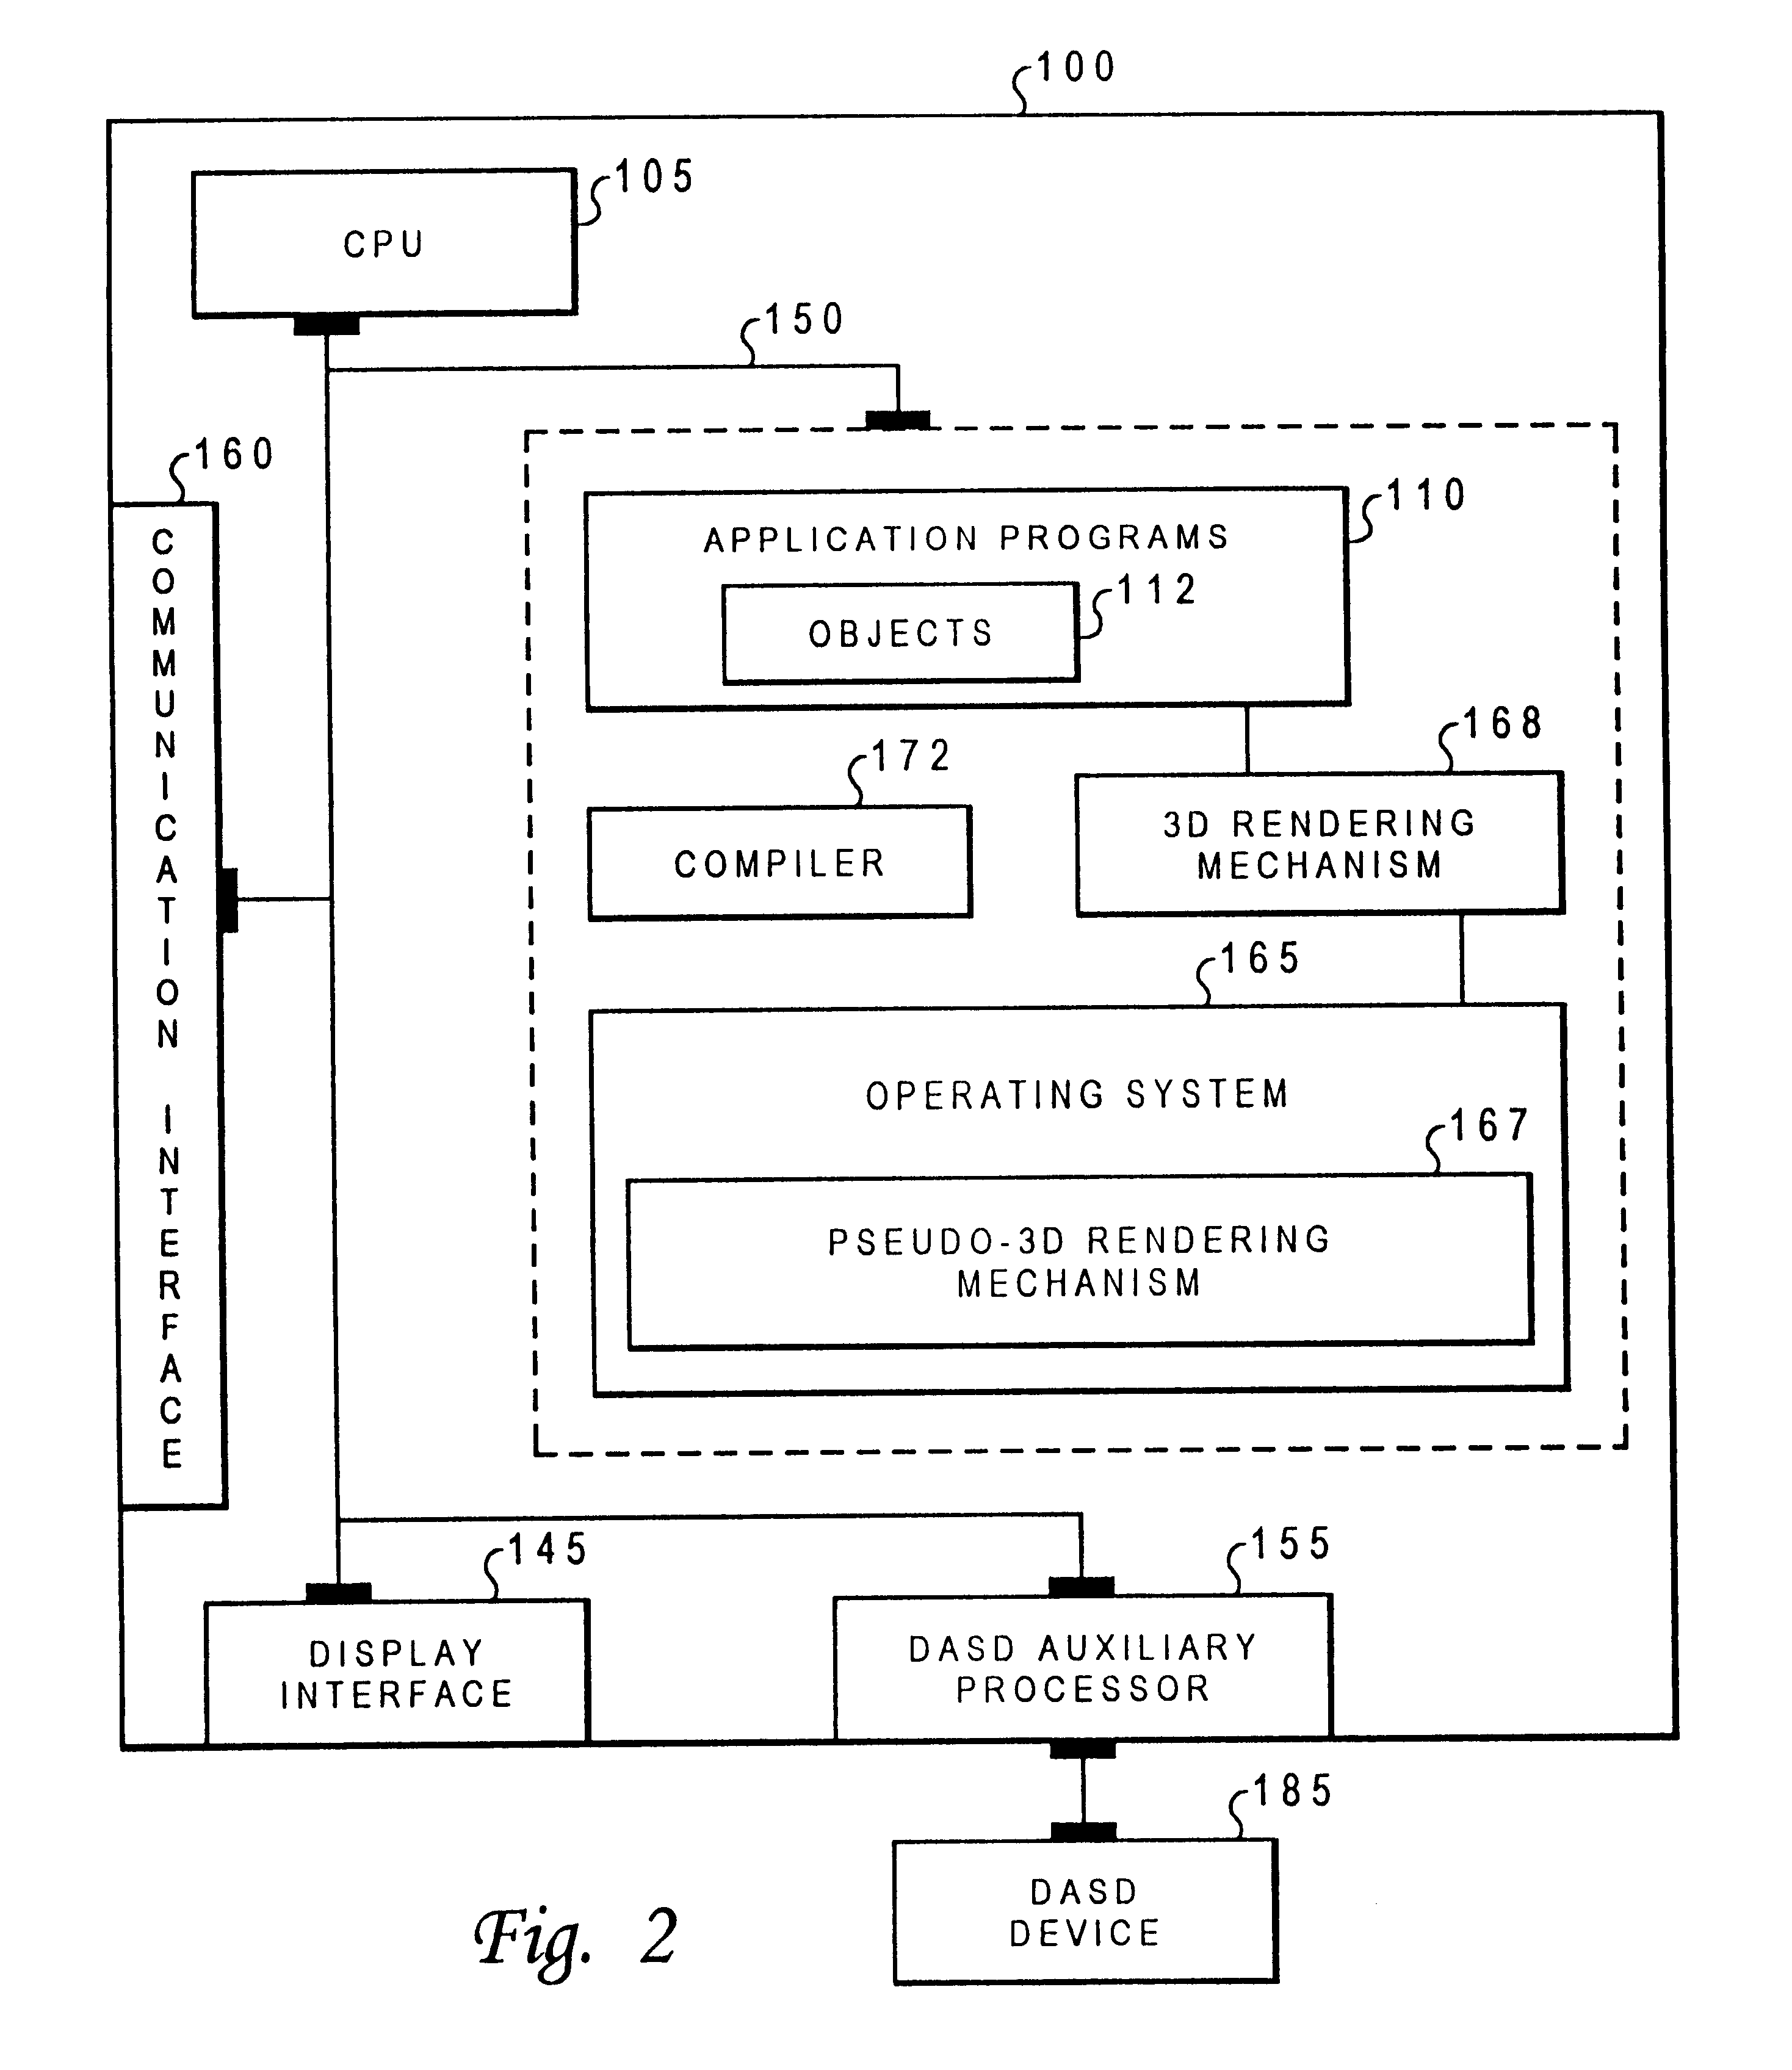 Method and apparatus for providing pseudo-3D rendering for virtual reality computer user interfaces